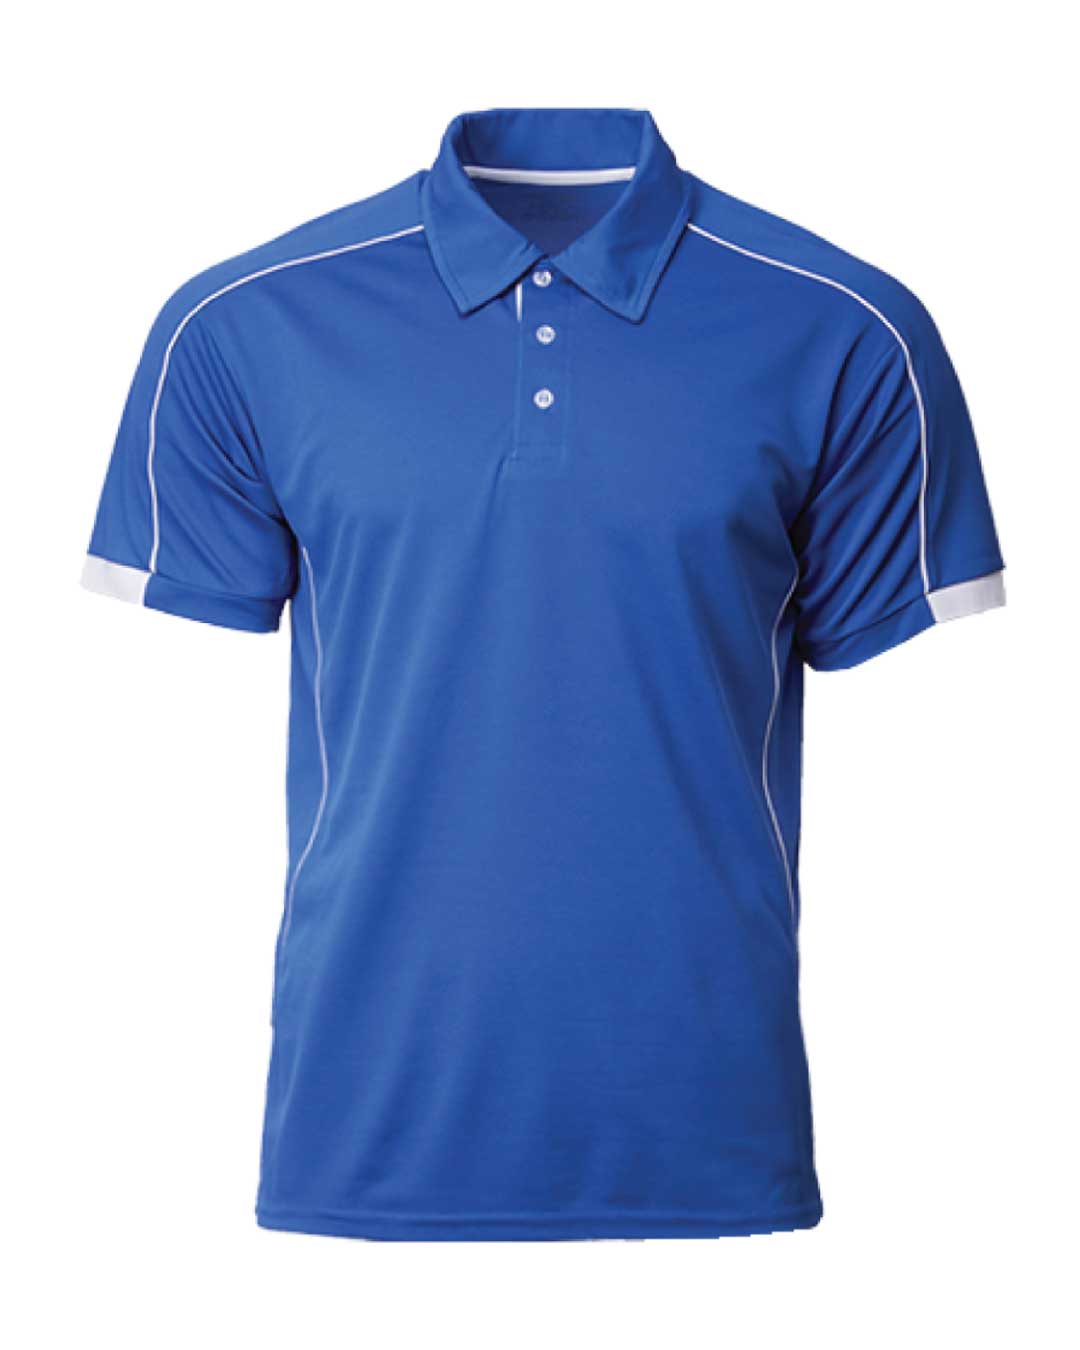 crossrunner® athletic polo crp 1500 finisher polo